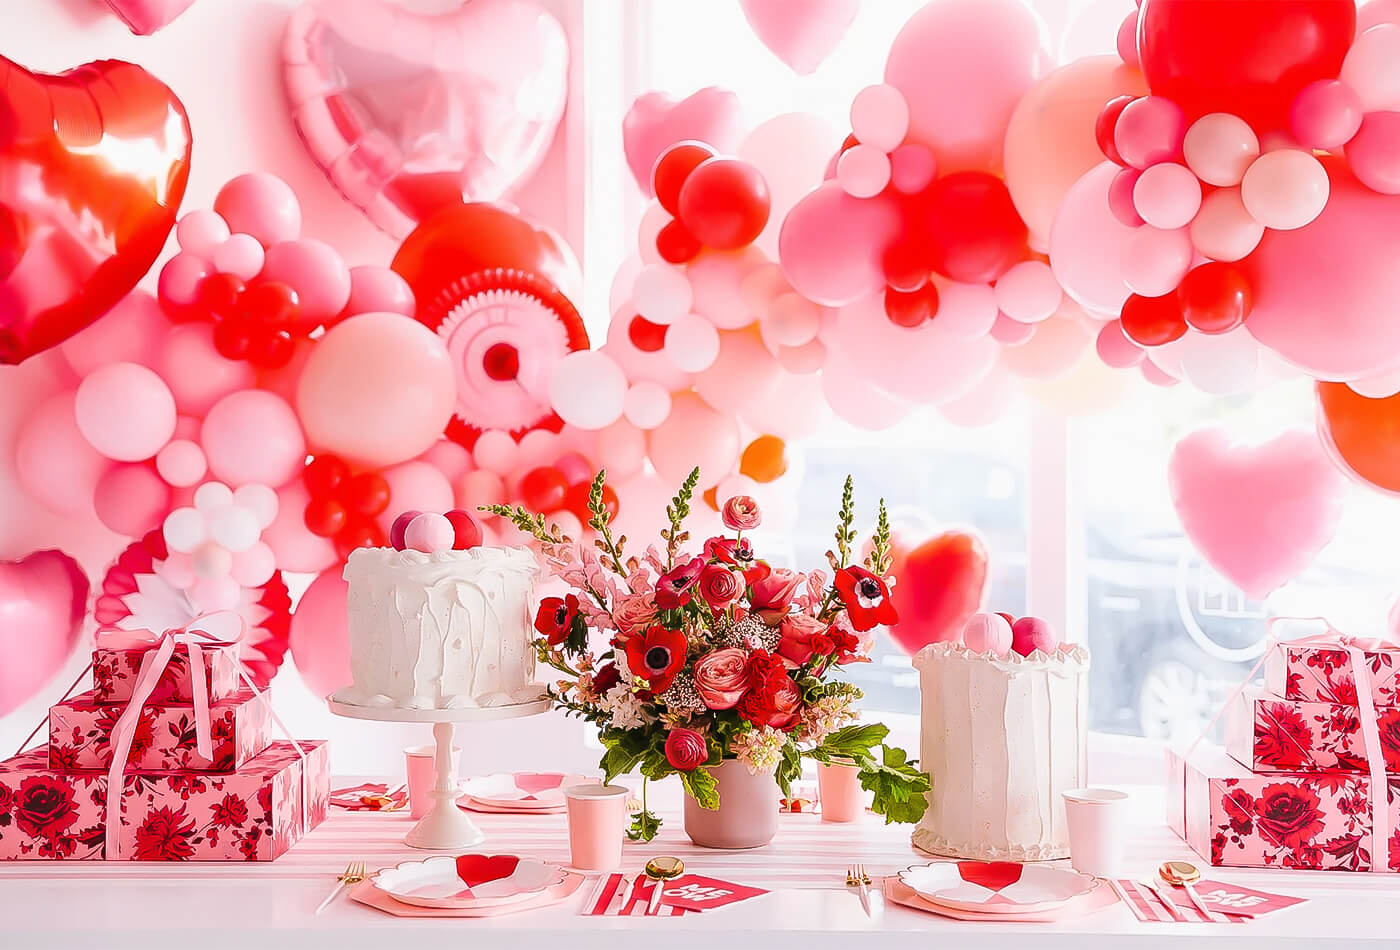 Valentine Decor to Try With Your Partner!